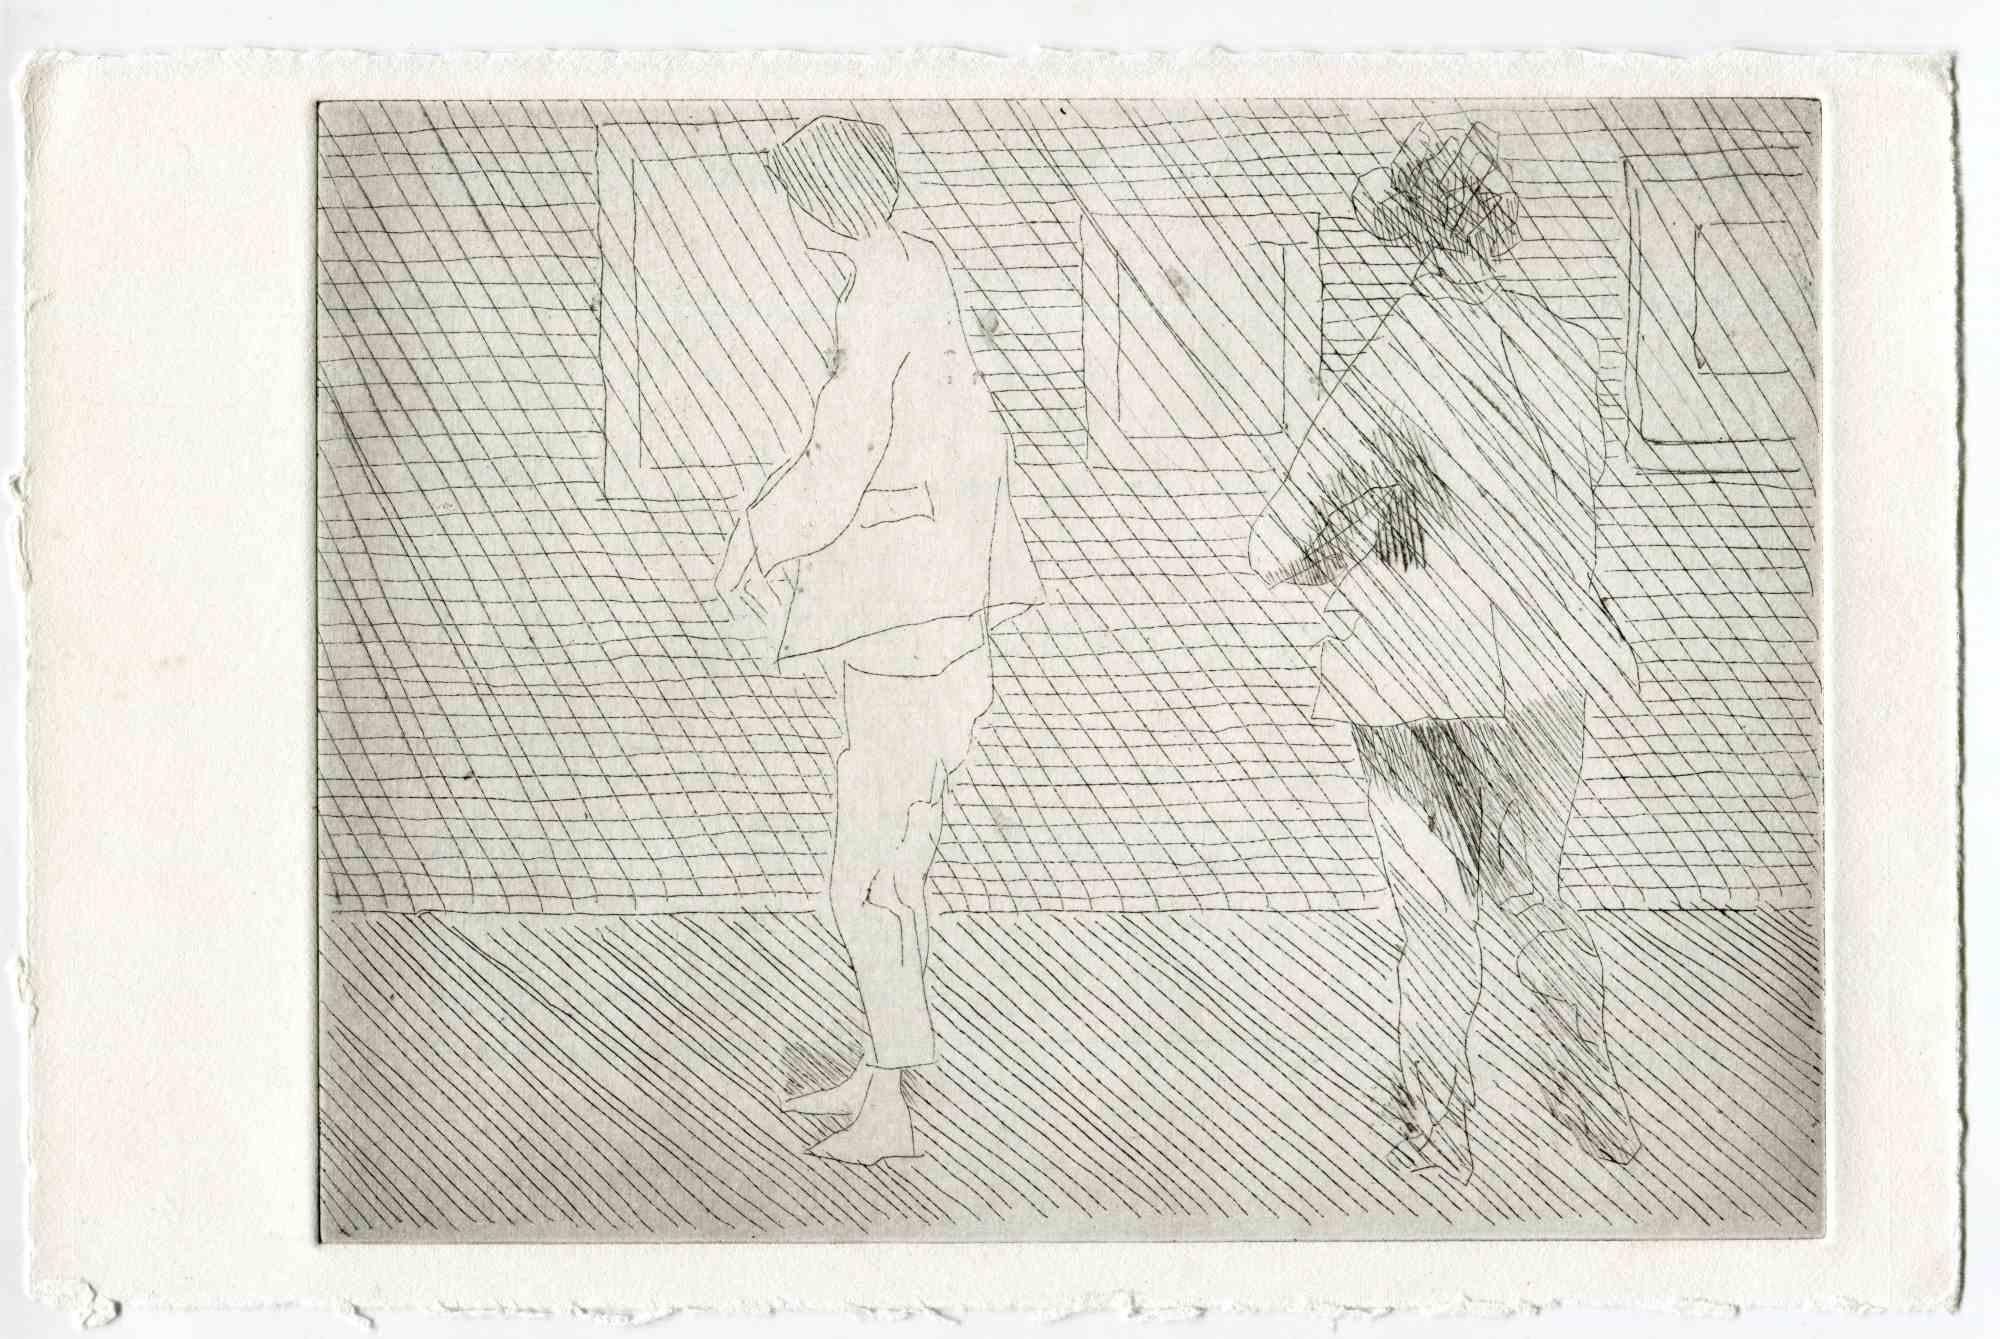 Unknown Figurative Print - The Exhibition - Original Etching and Drypoint - Mid-20th Century